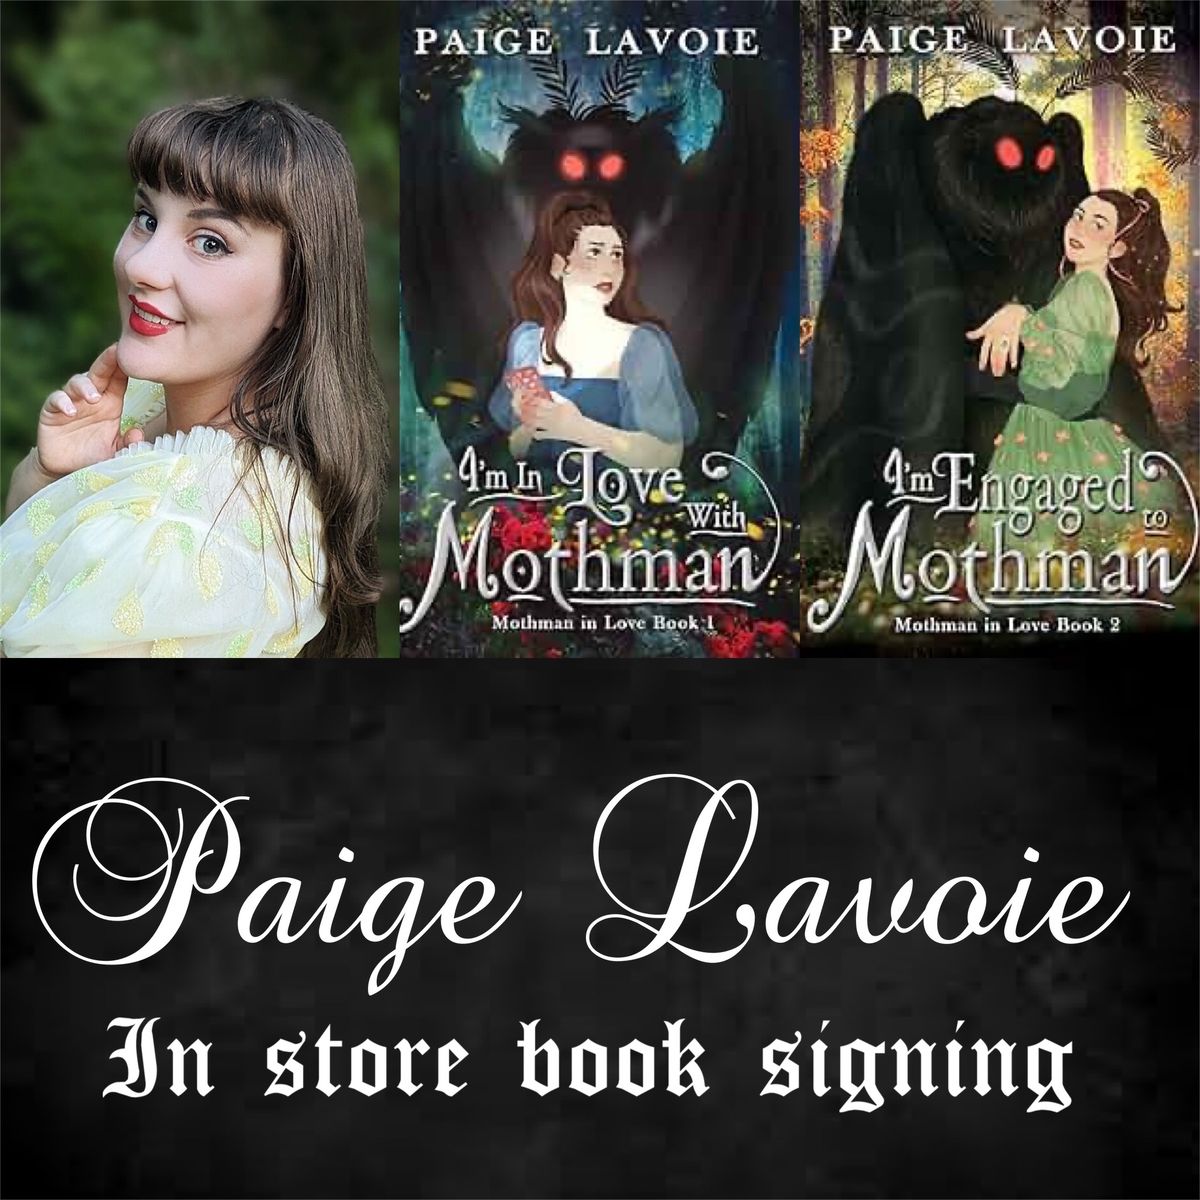 I\u2019m in Love with Mothman- book signing with author Paige Lavoie